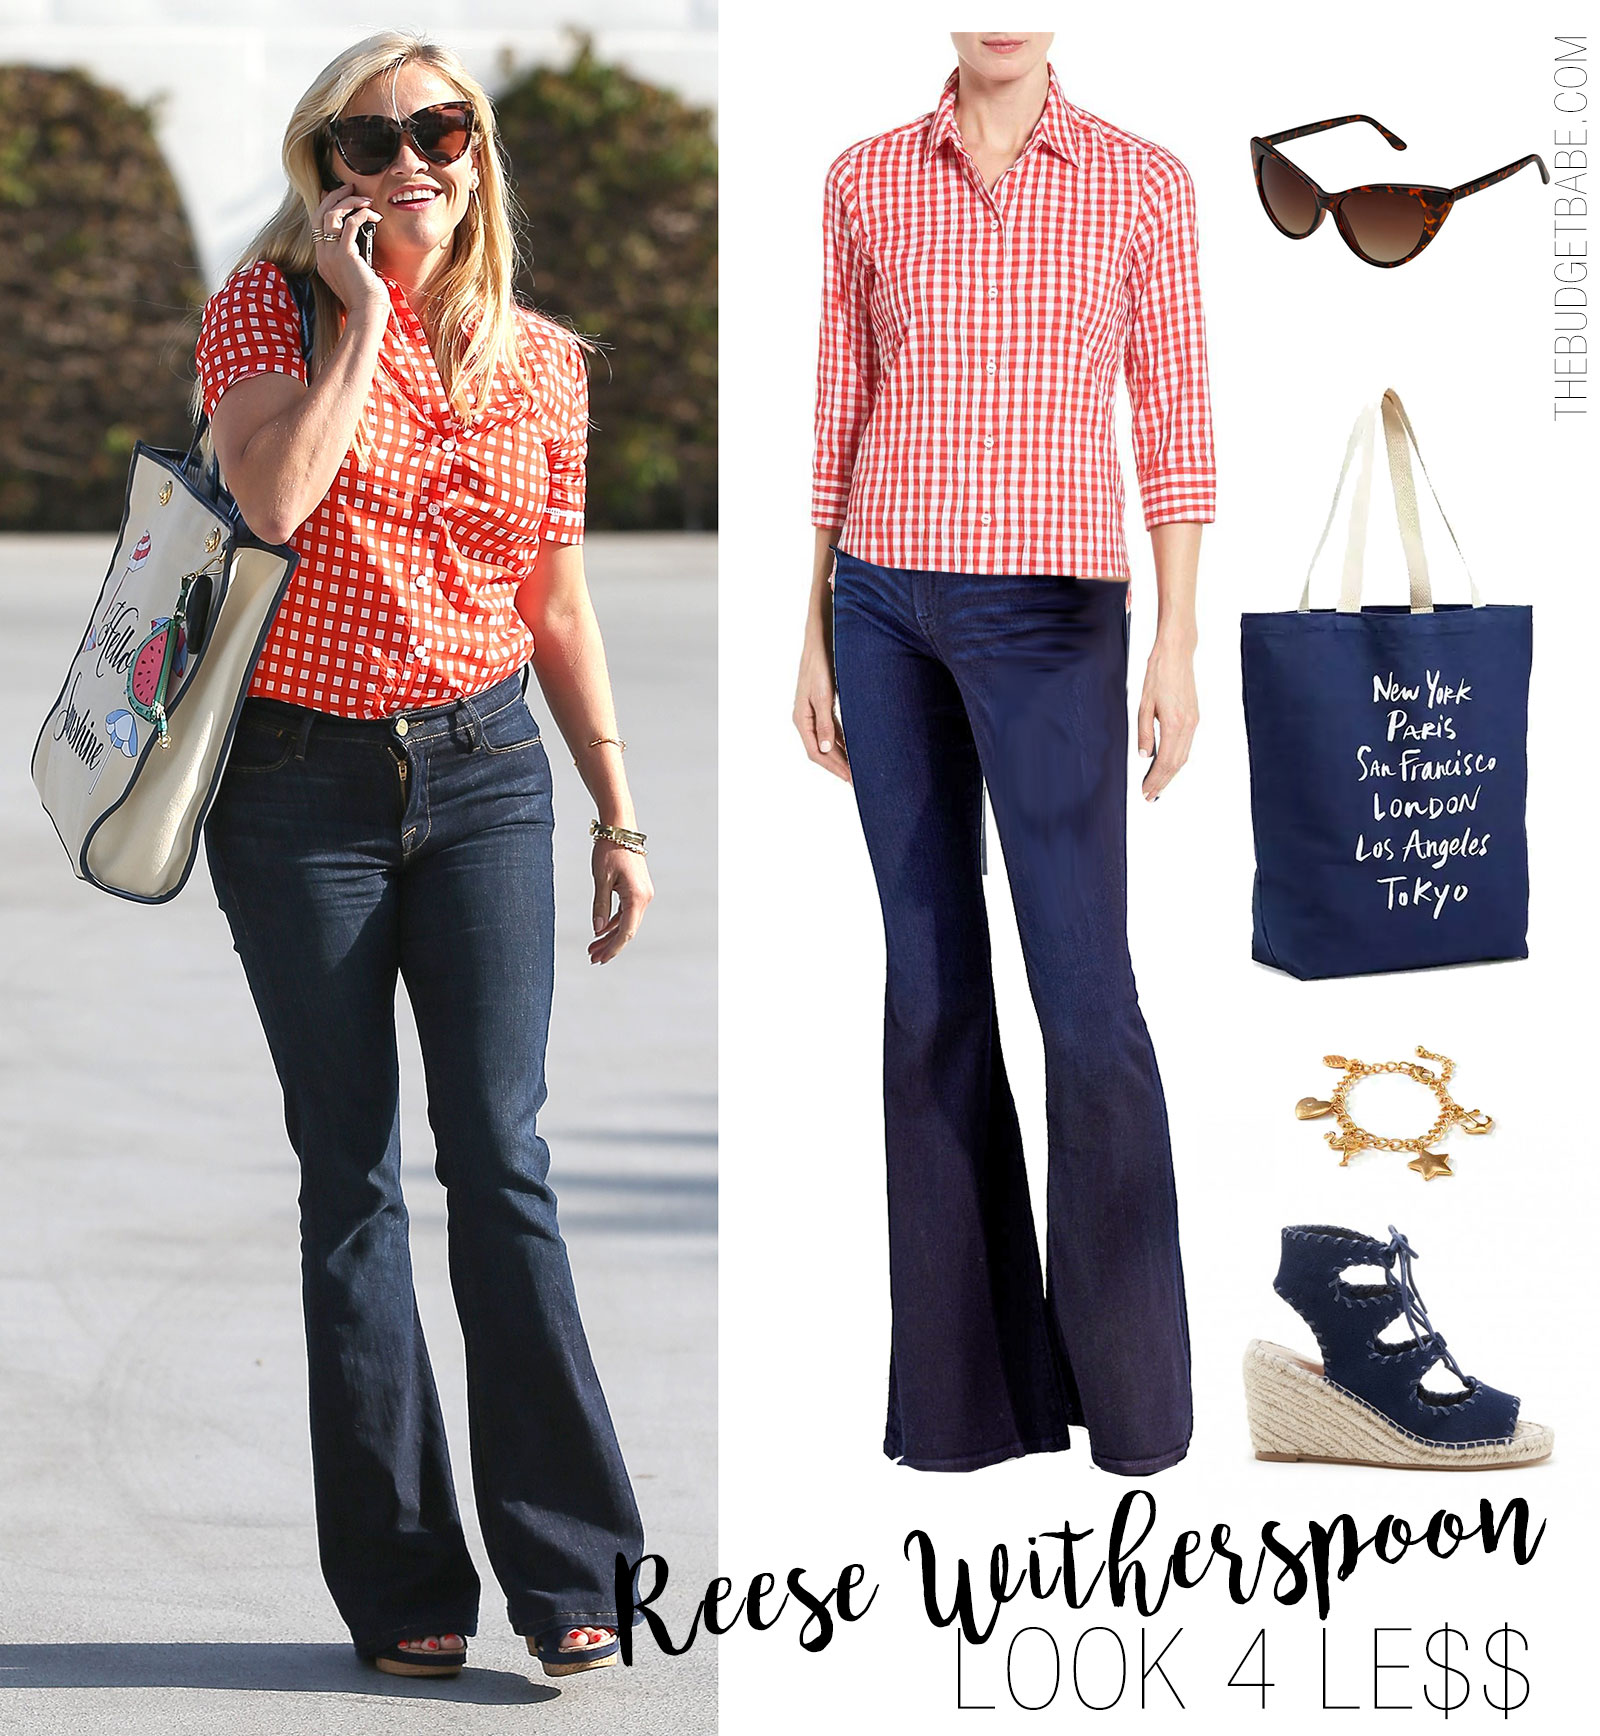 Reese Witherspoon is summery in a red gingham shirt, flare jeans and wedge sandals.